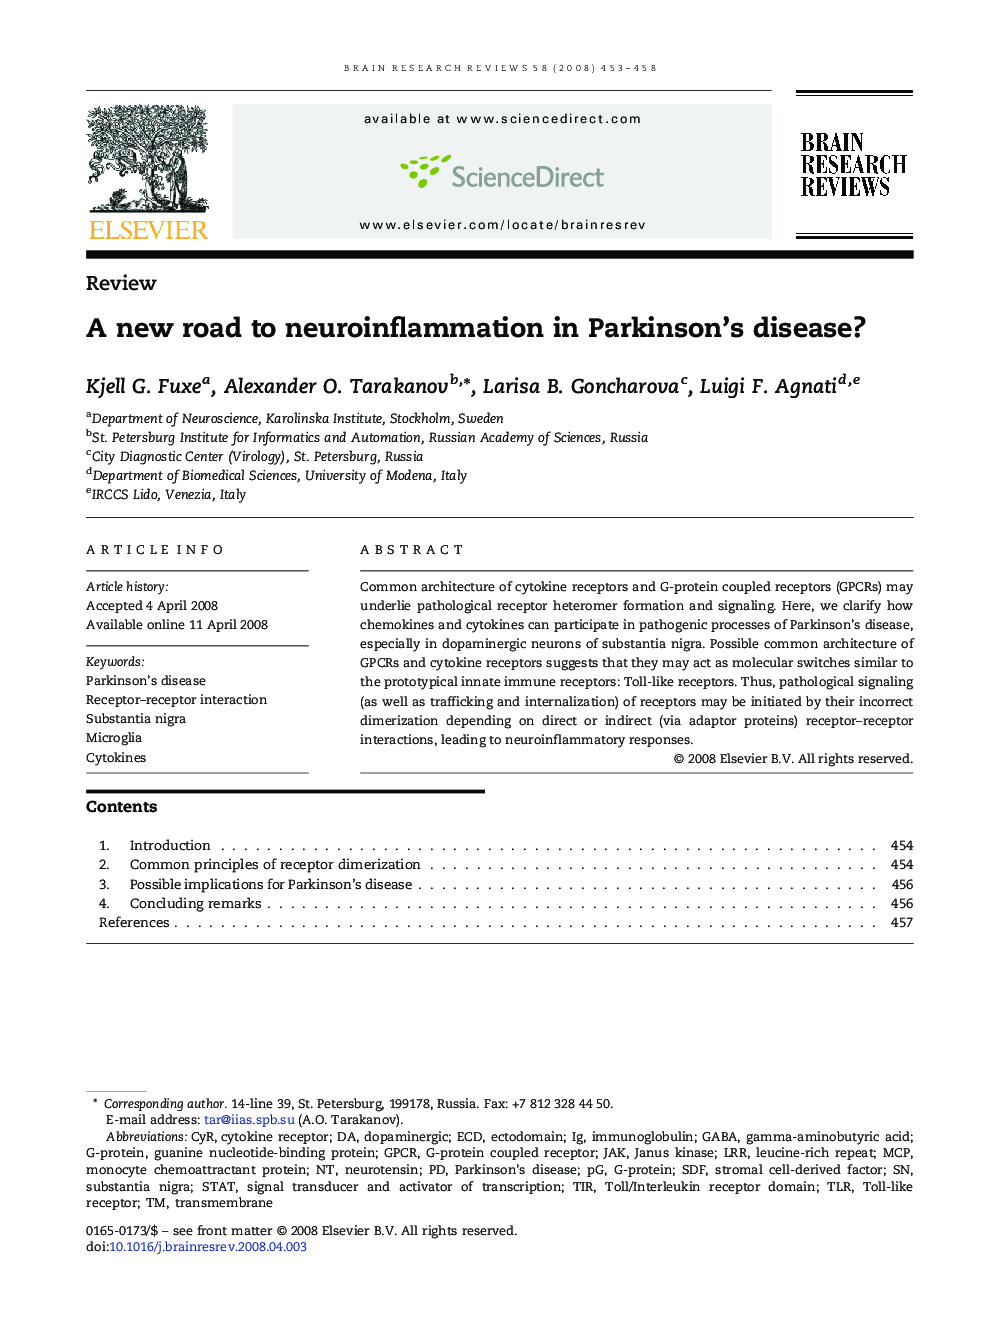 A new road to neuroinflammation in Parkinson's disease?